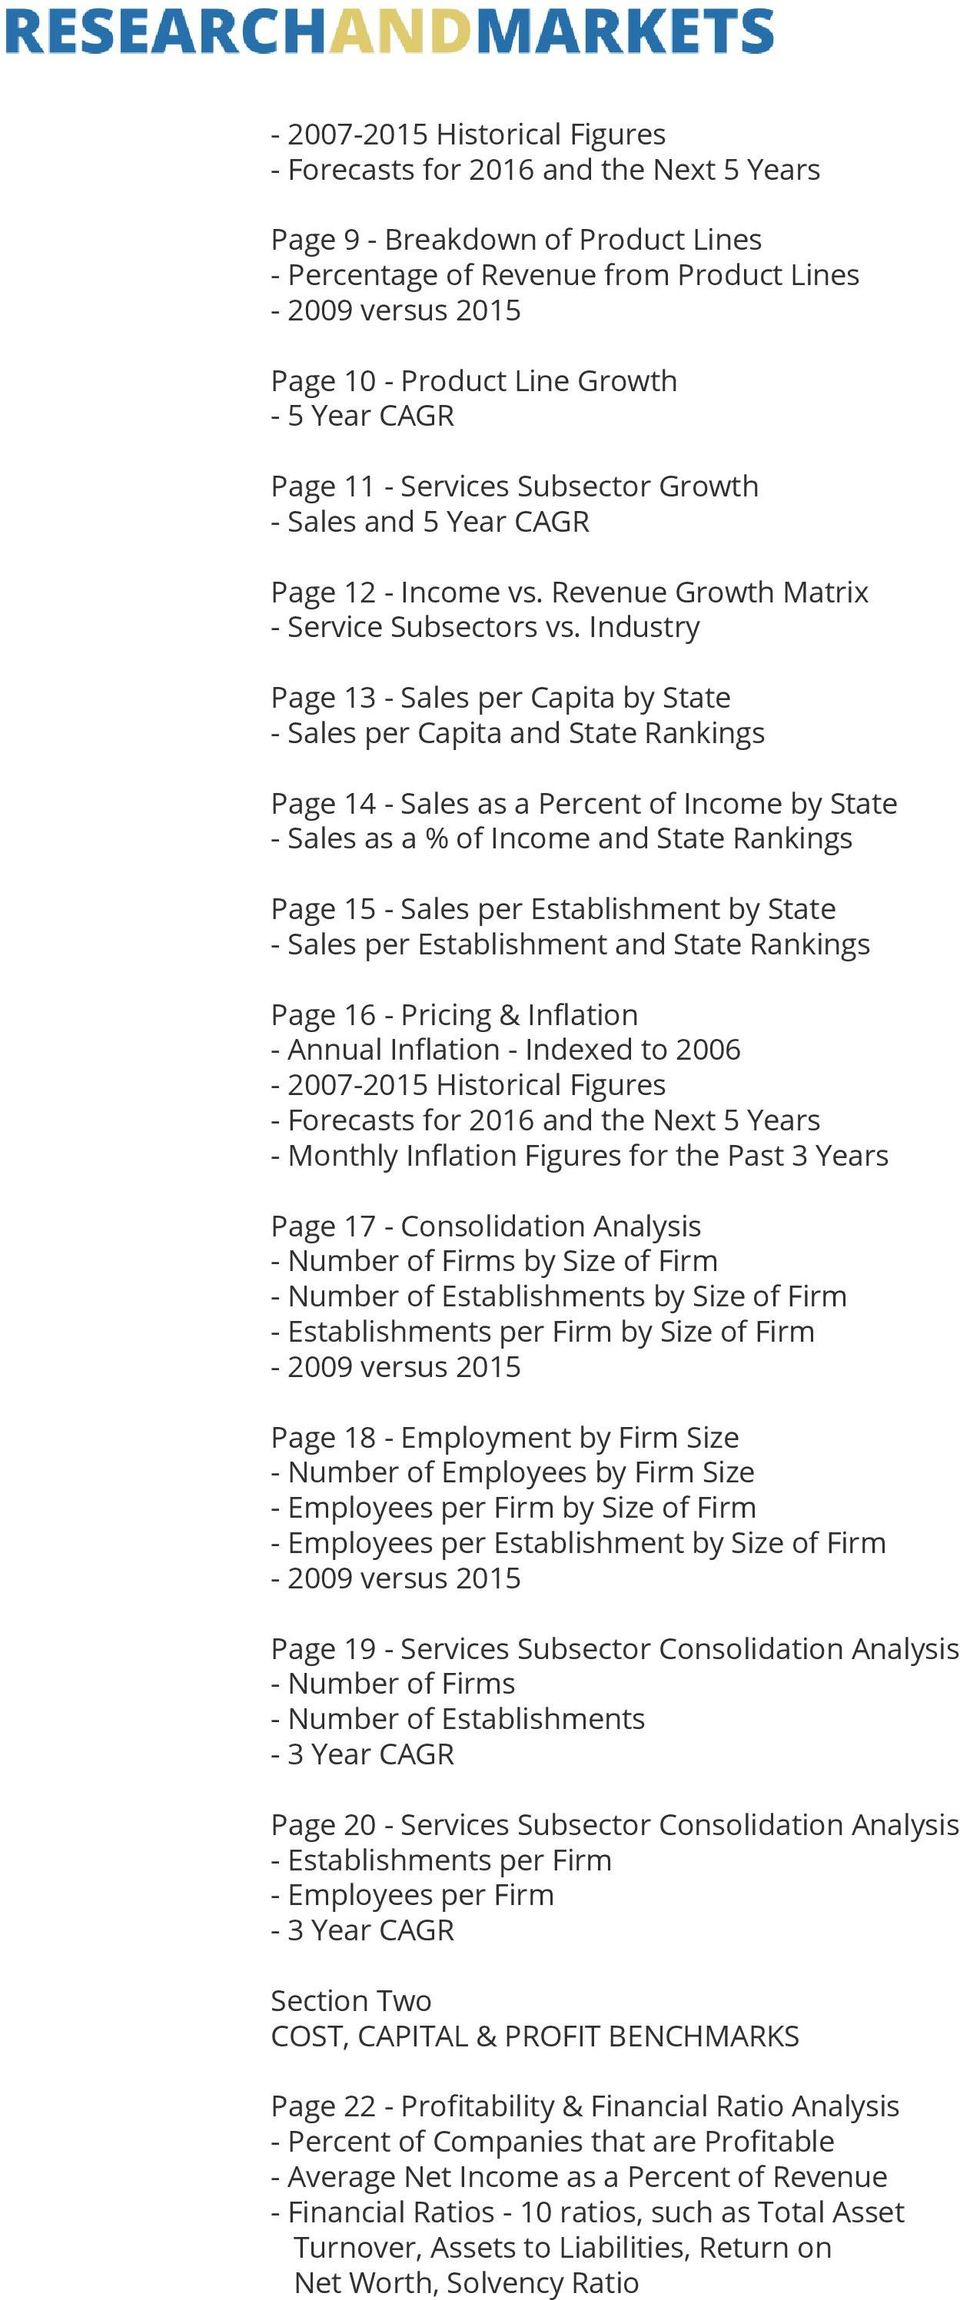 Industry Page 13 - Sales per Capita by State - Sales per Capita and State Rankings Page 14 - Sales as a Percent of Income by State - Sales as a % of Income and State Rankings Page 15 - Sales per